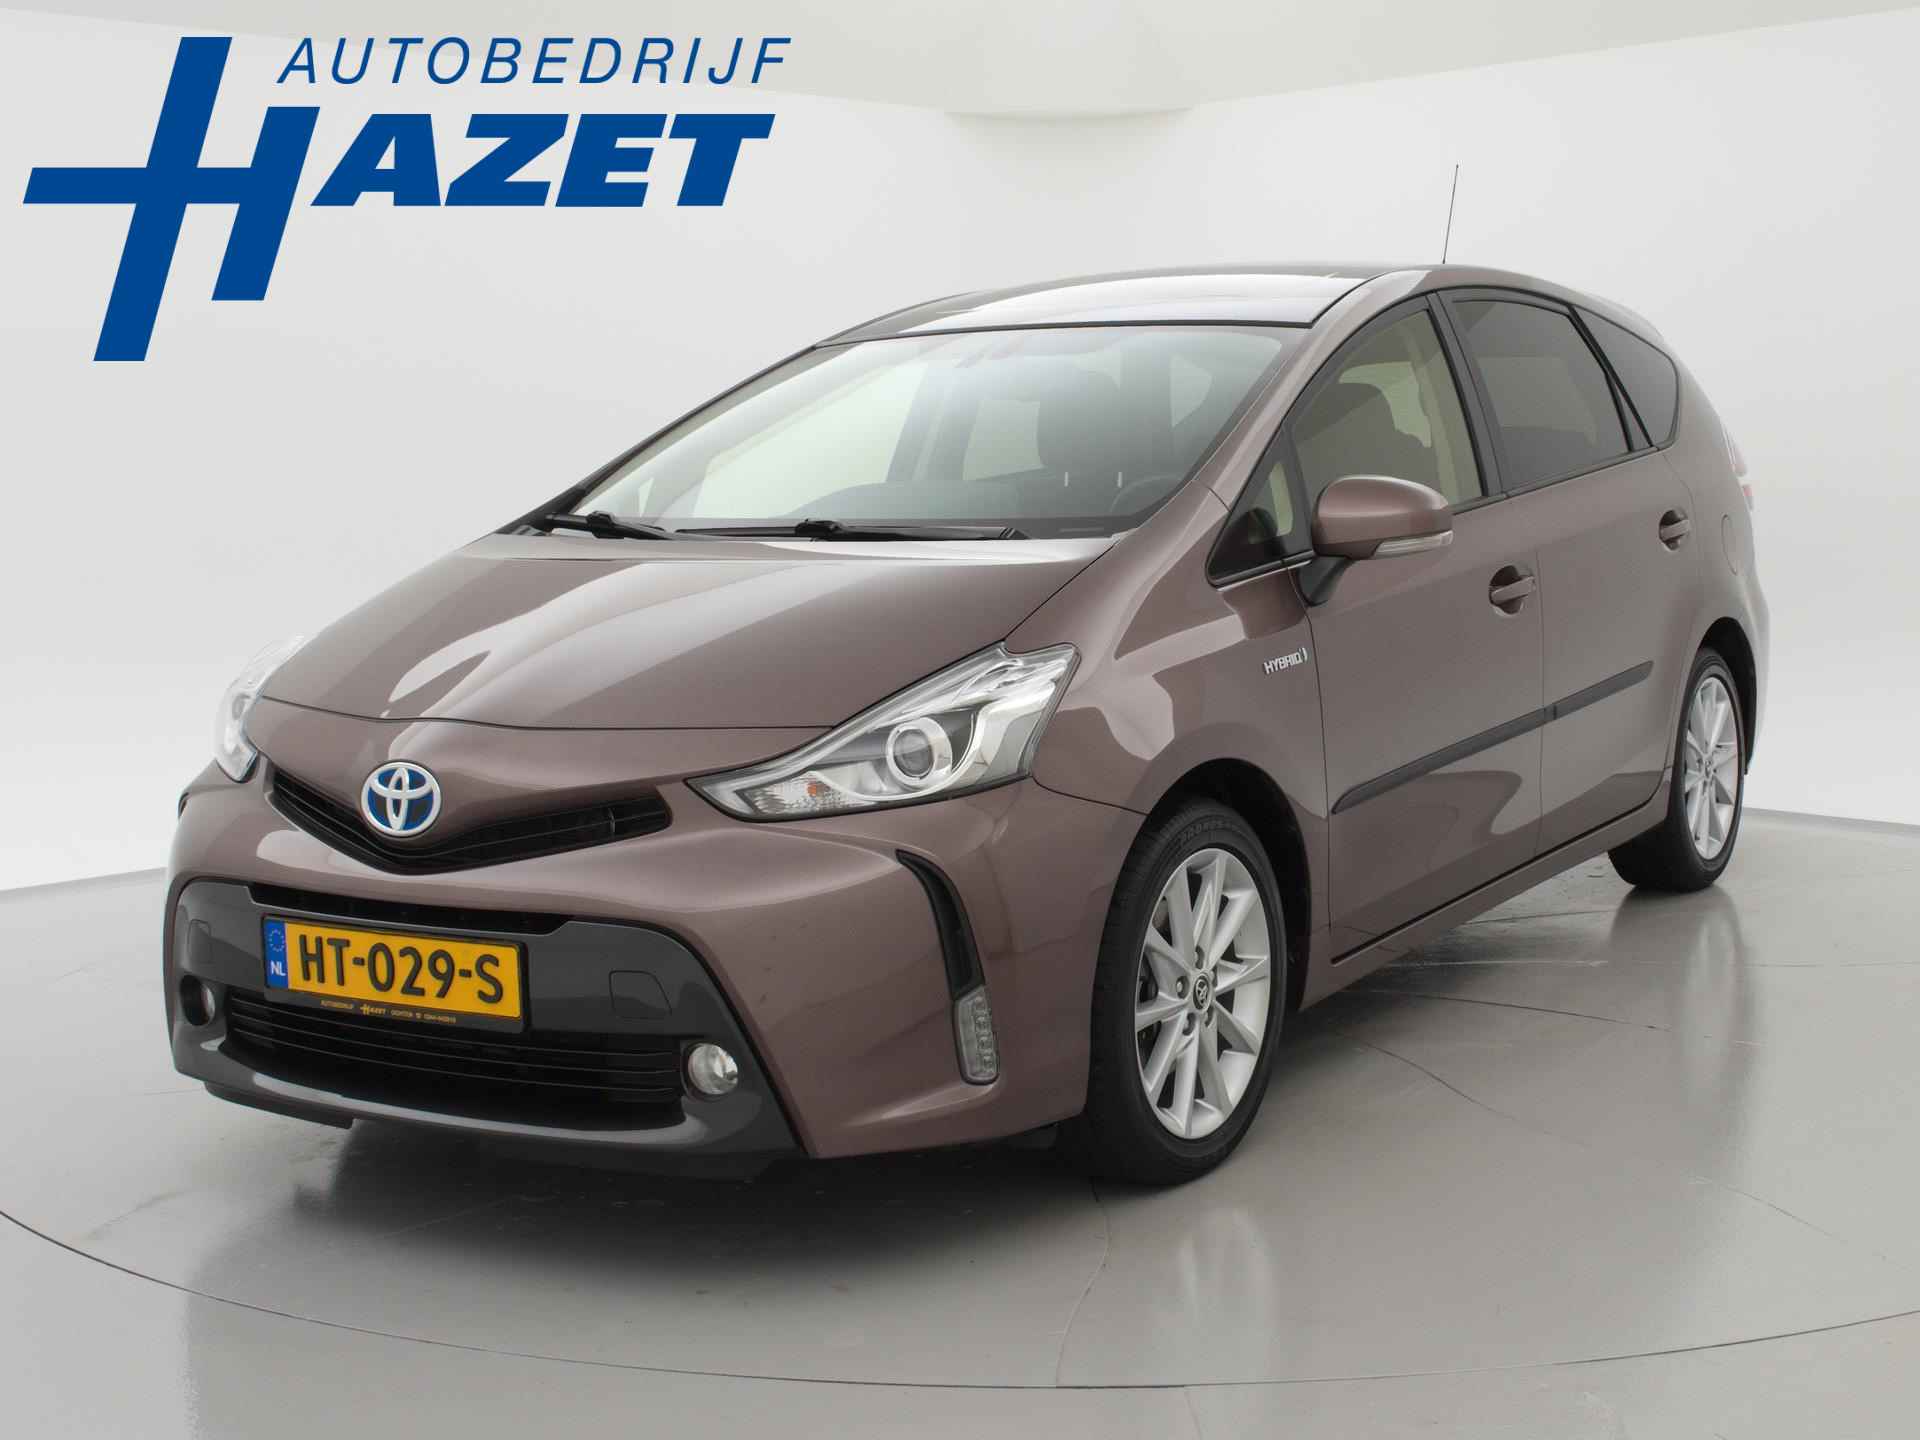 Toyota Prius Wagon 1.8 7-PERSOONS Toyota Prius + WAGON 1.8 7-PERSOONS + PANORAMA / NAVIGATIE / LED - 1/36